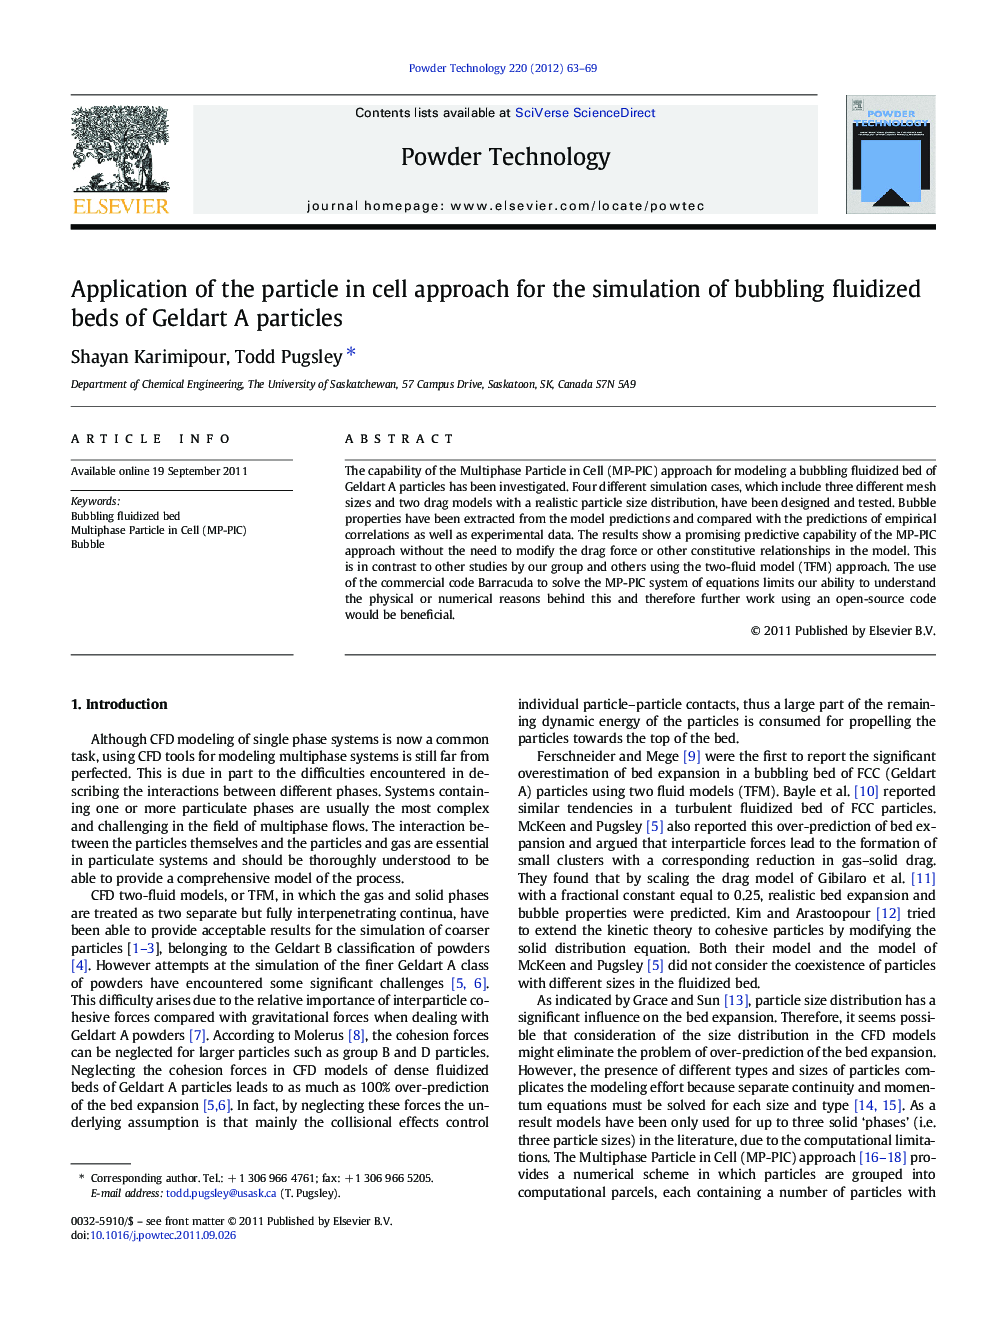 Application of the particle in cell approach for the simulation of bubbling fluidized beds of Geldart A particles